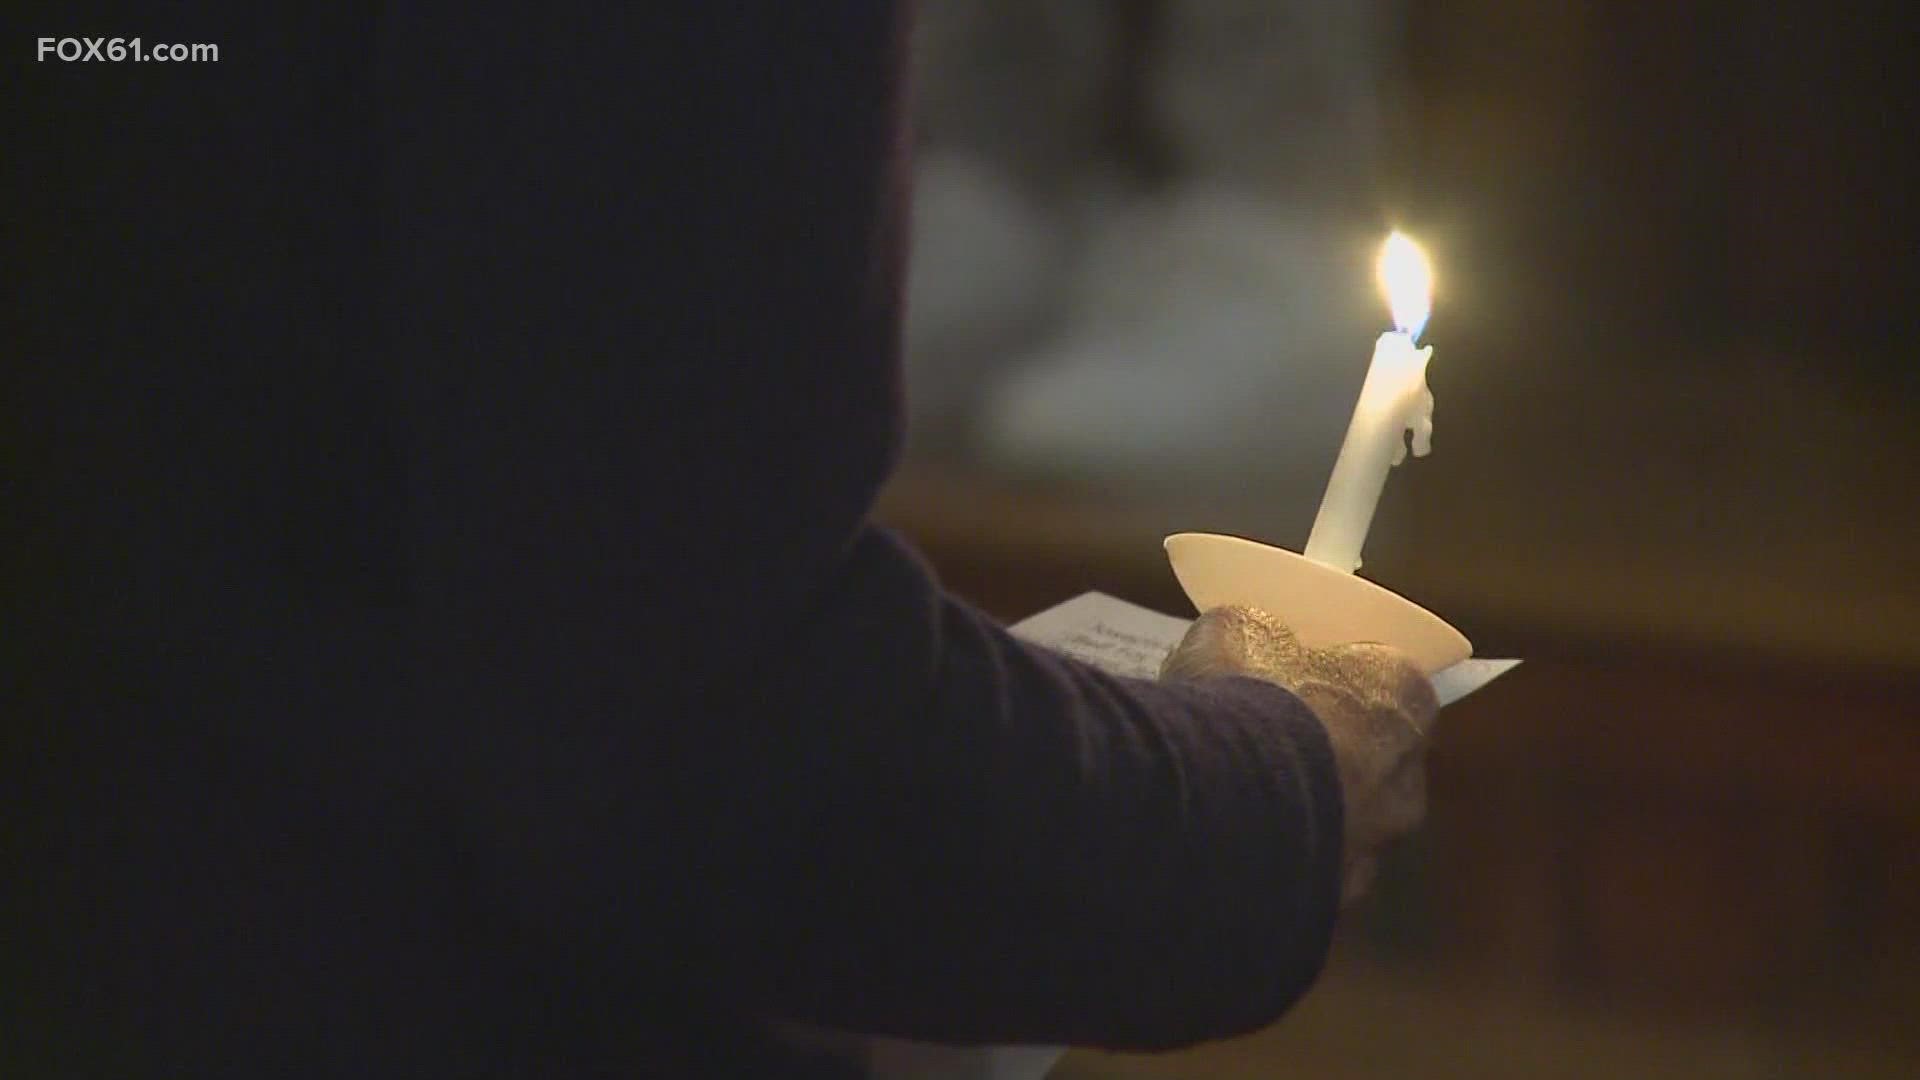 The vigil was held in a city that is often impacted by gun violence, pointing to the need for change still, 10 years after the tragedy in Sandy Hook.